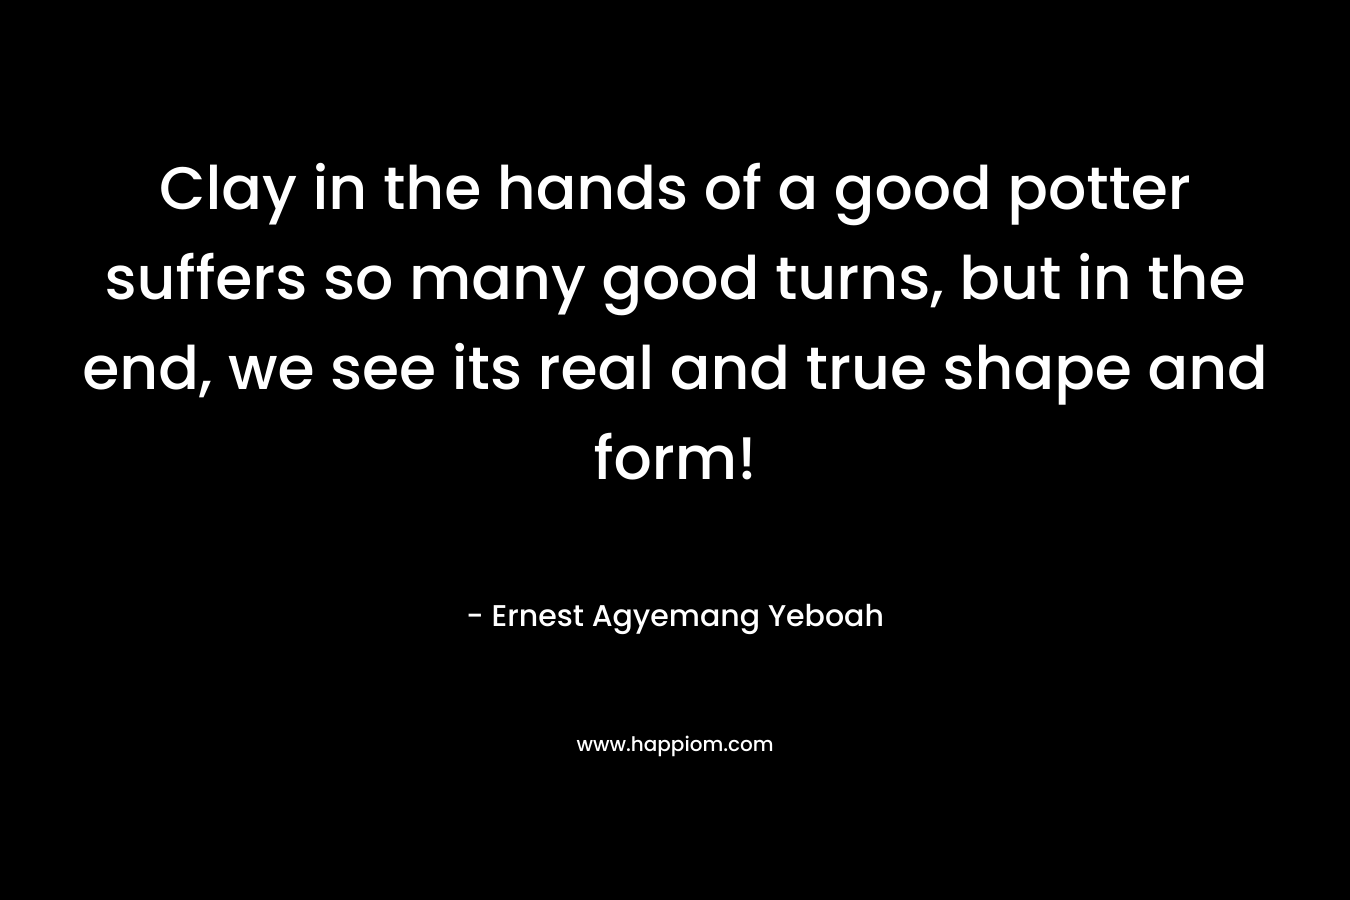 Clay in the hands of a good potter suffers so many good turns, but in the end, we see its real and true shape and form!